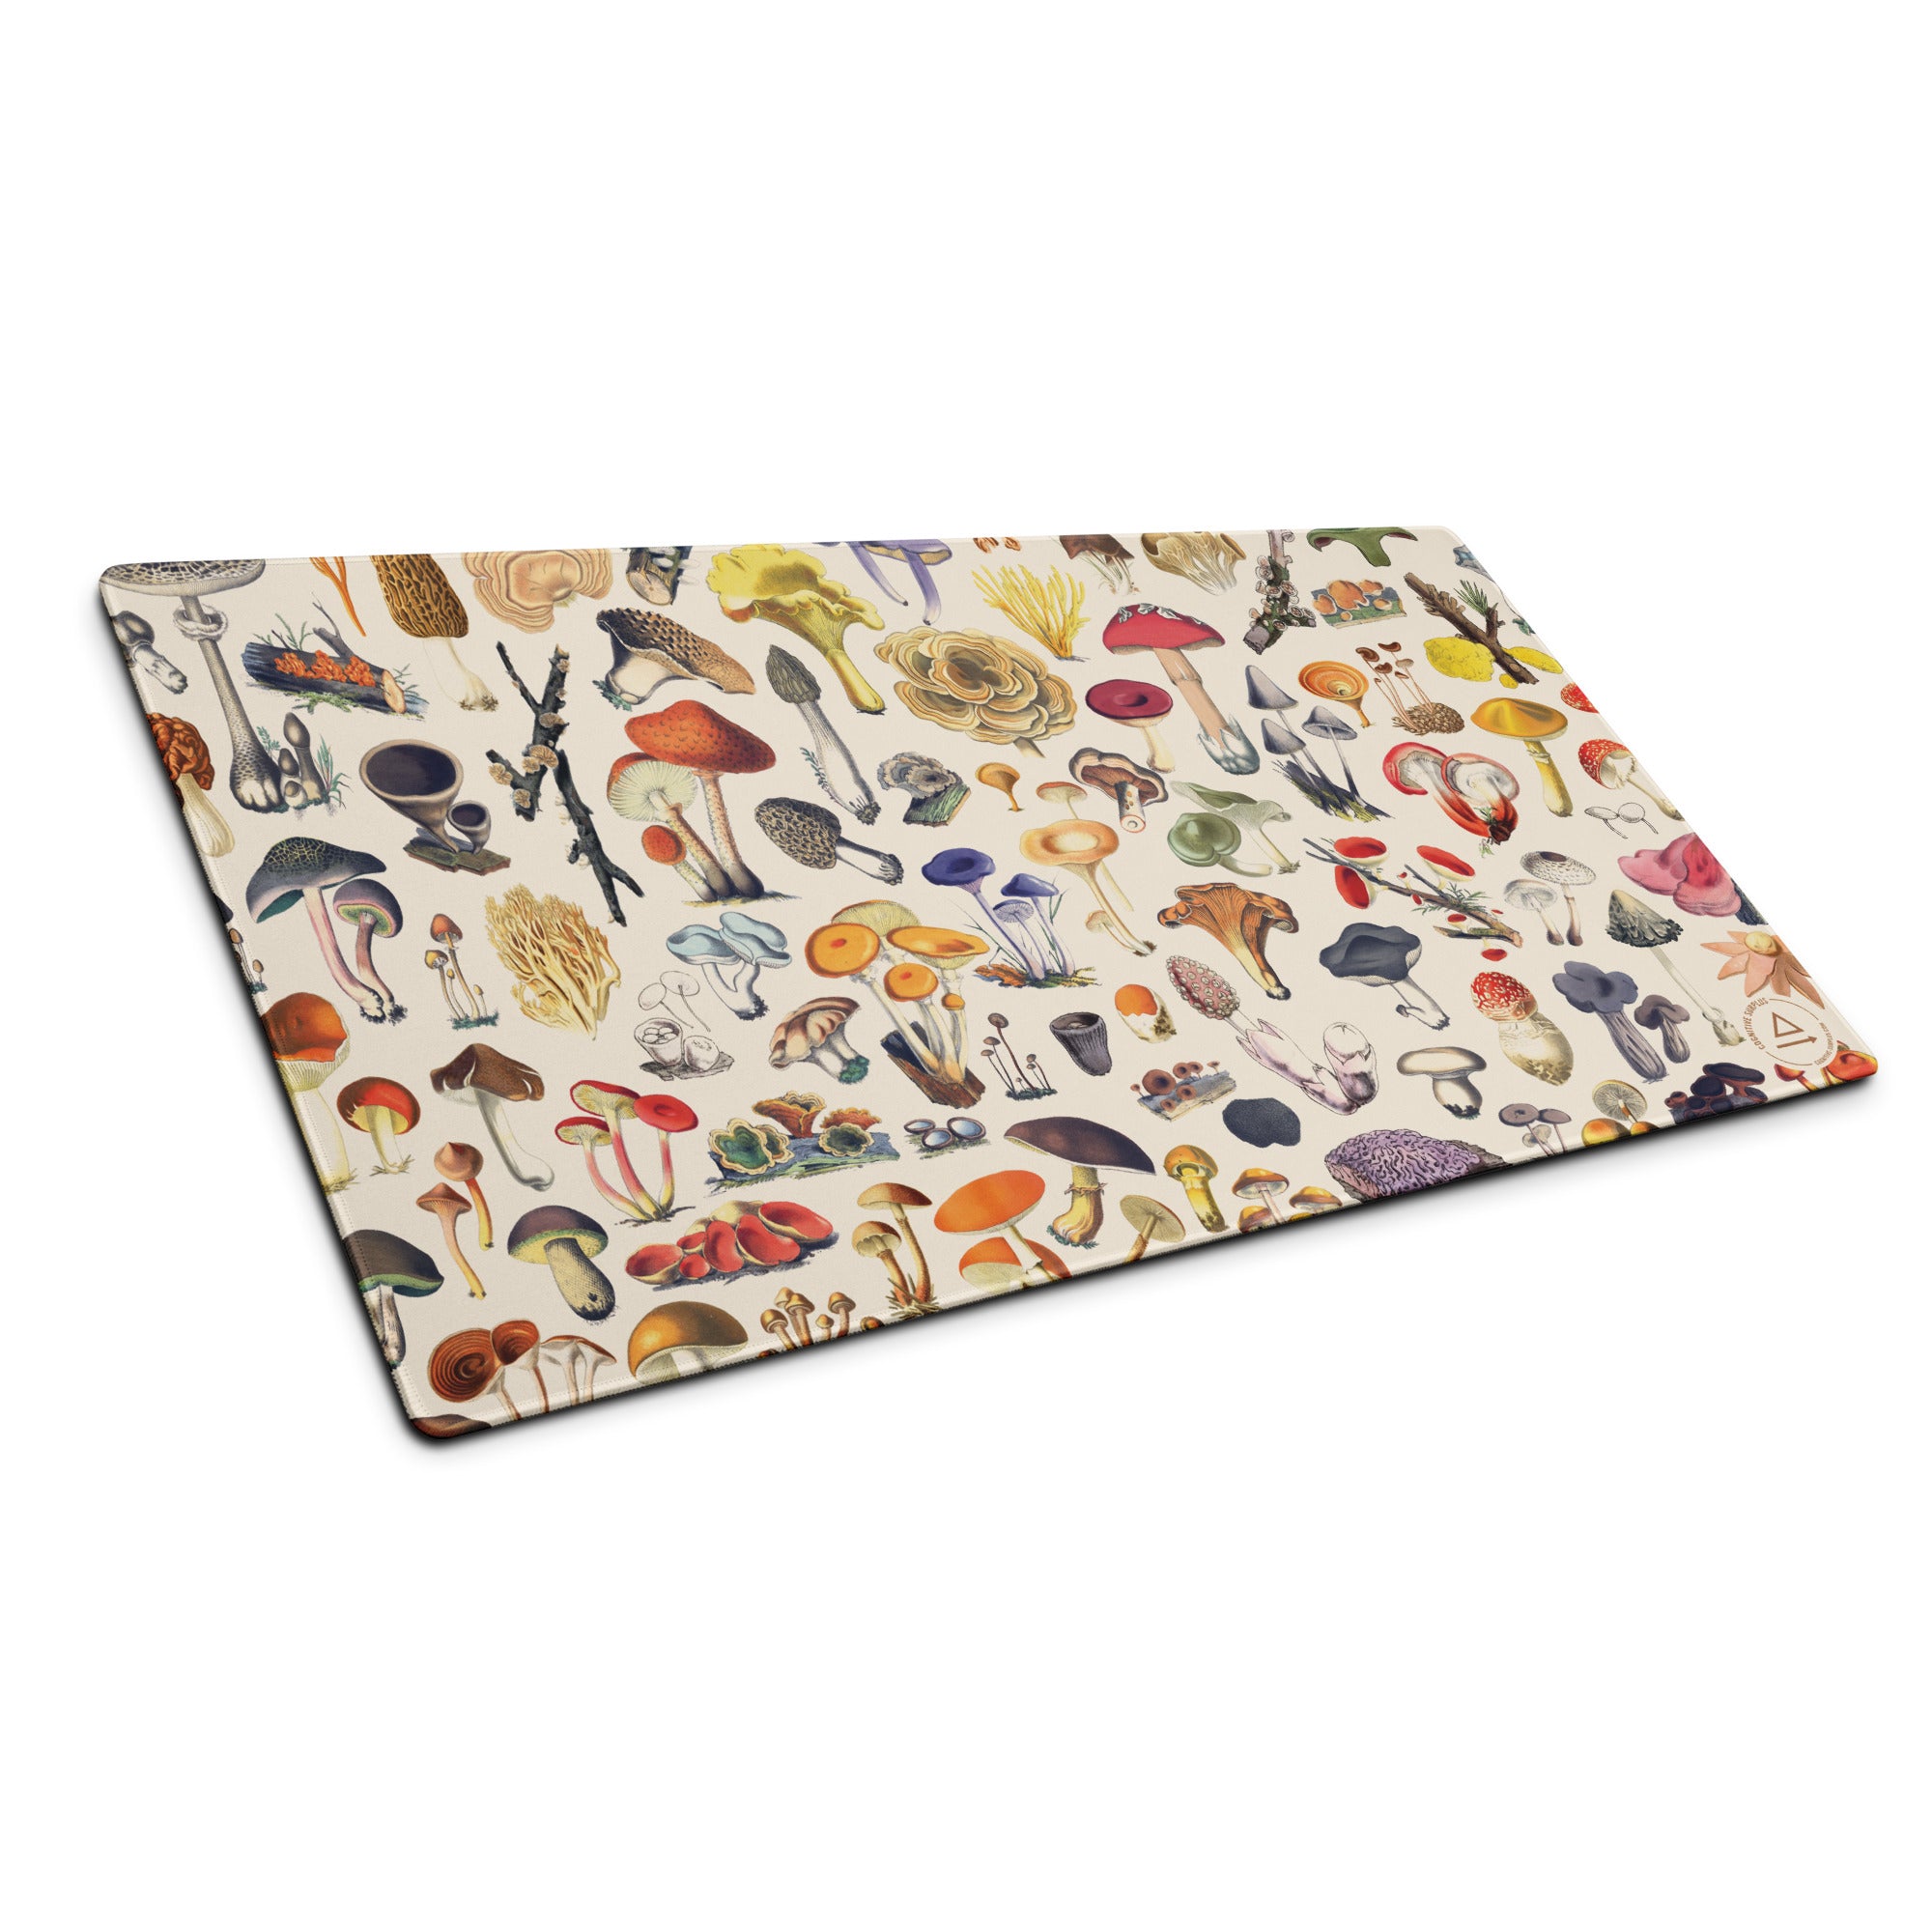 gaming-mouse-pad-white-36x18-front-65725e2b70b76.jpg